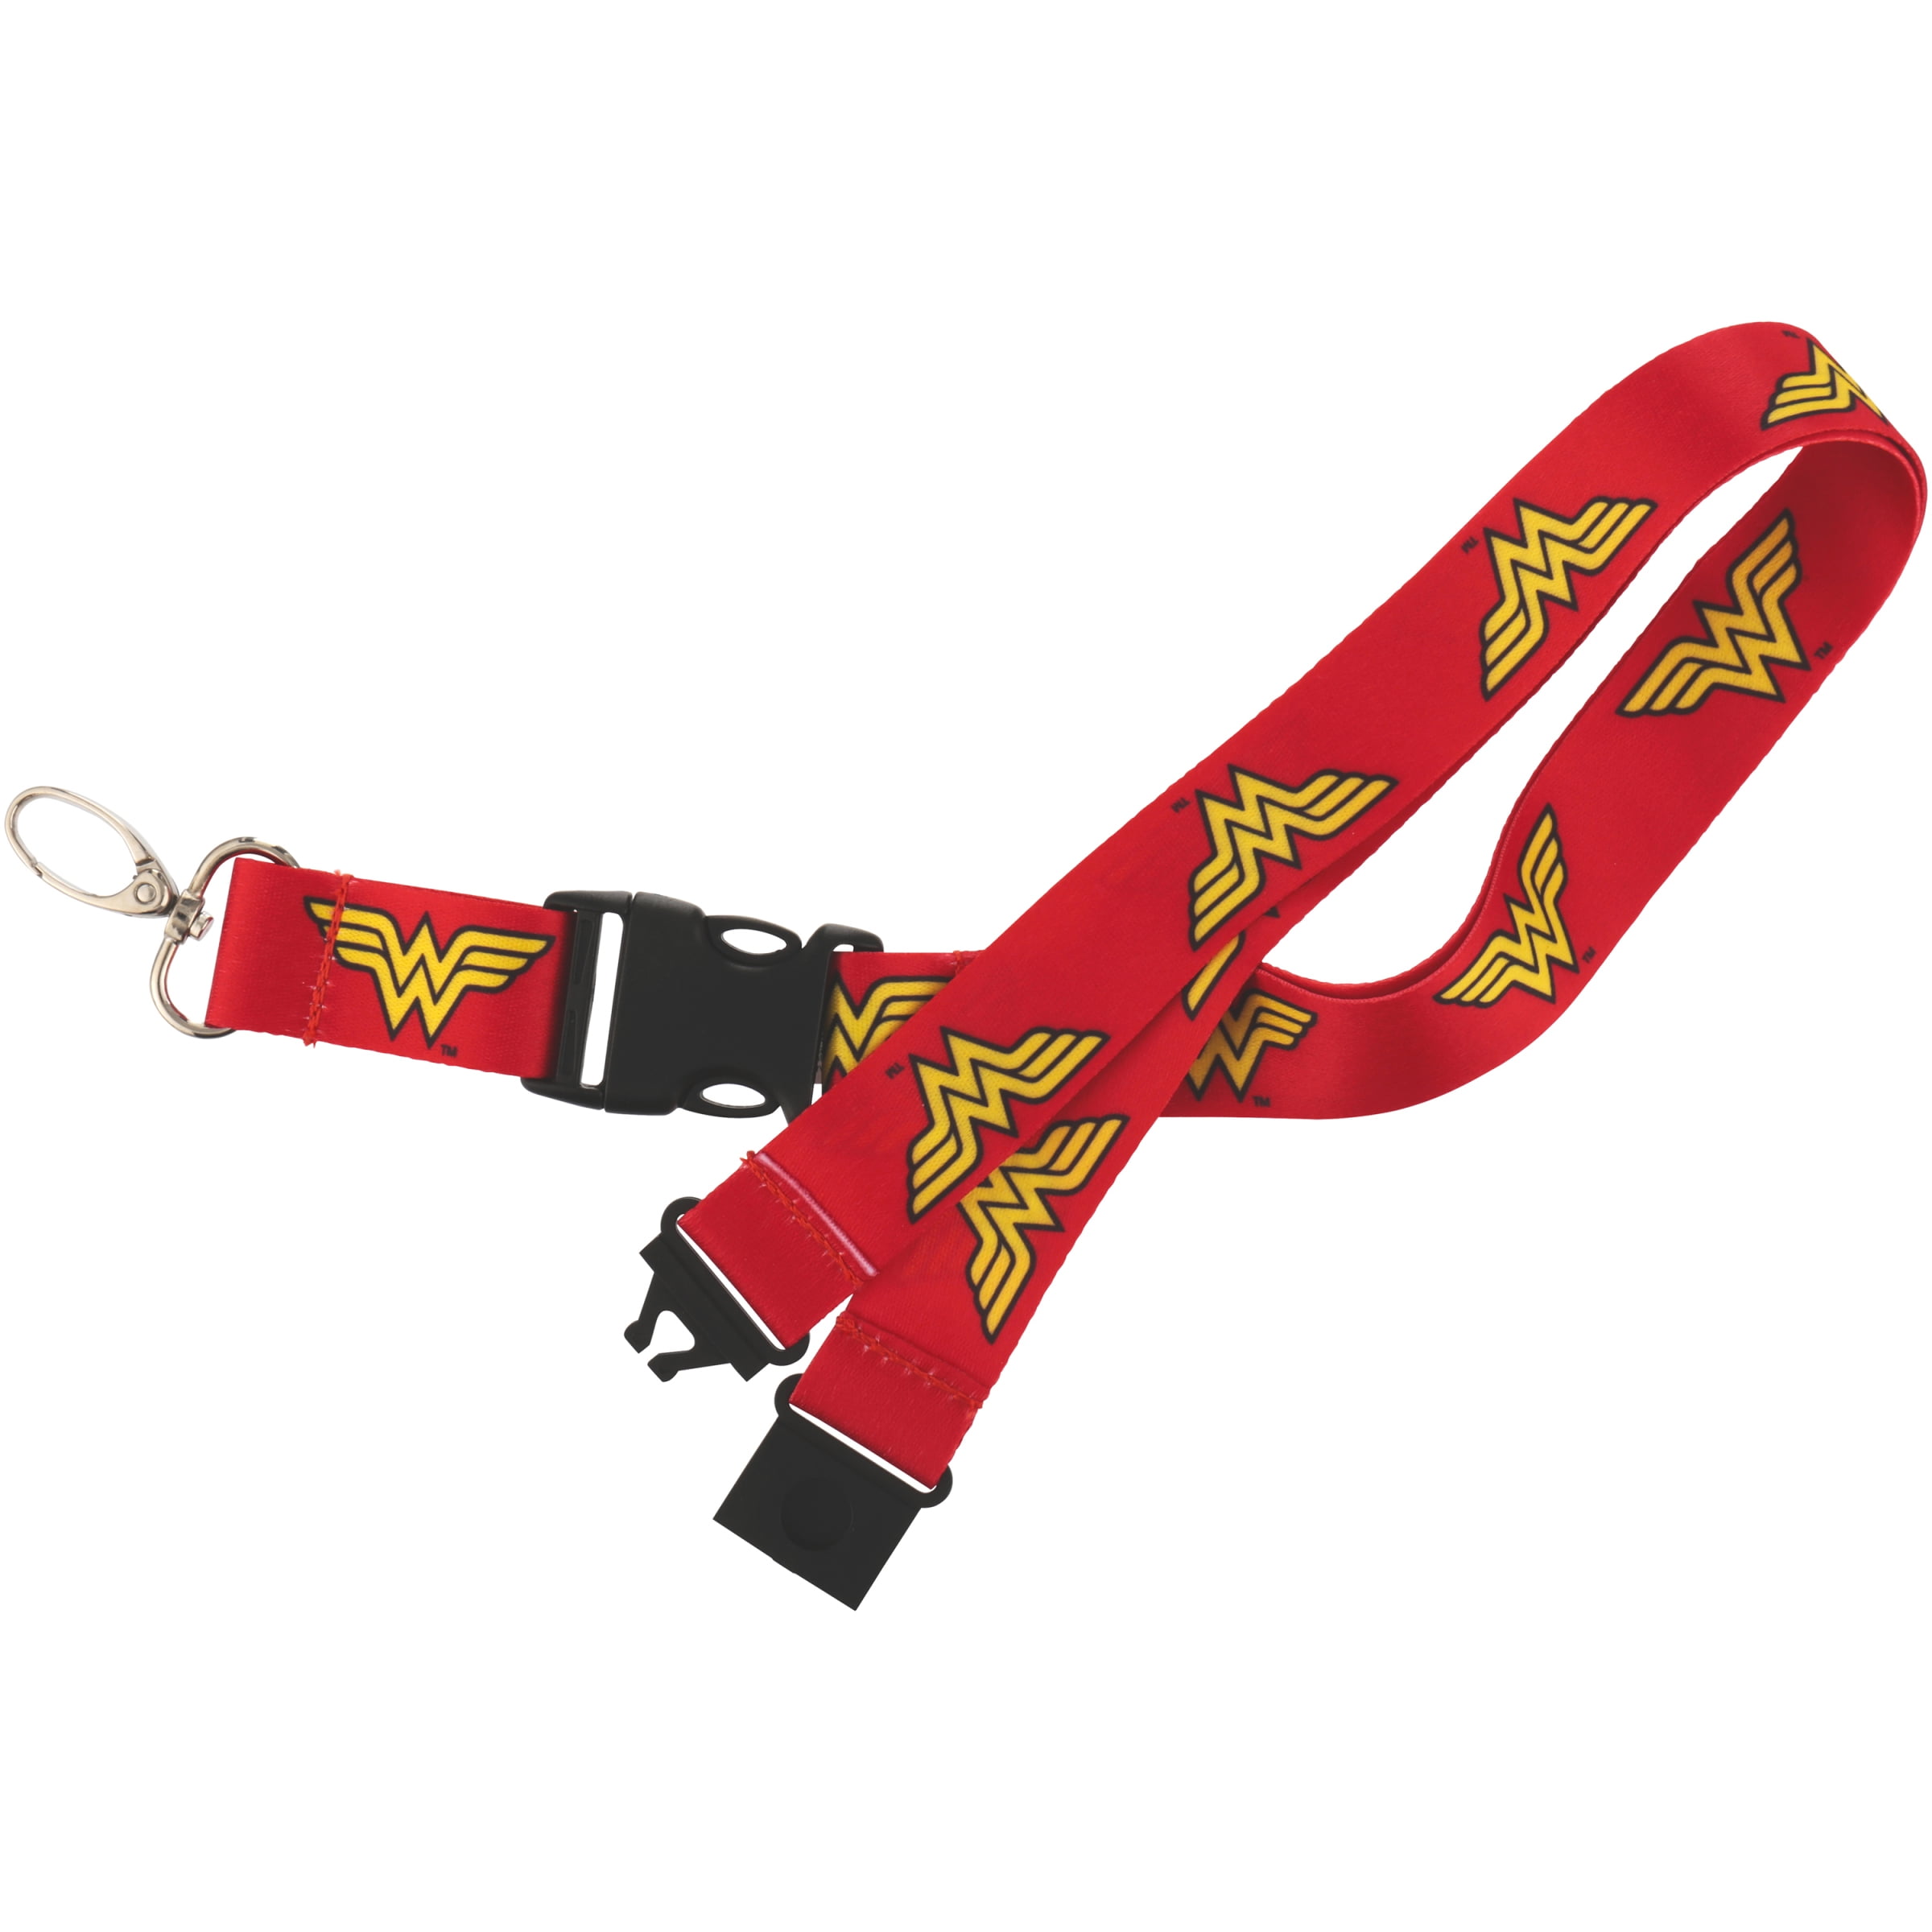 Details about   Wonder Woman Suit Up Costume Style Lanyard with Metal WW Logo Charm NEW UNUSED 